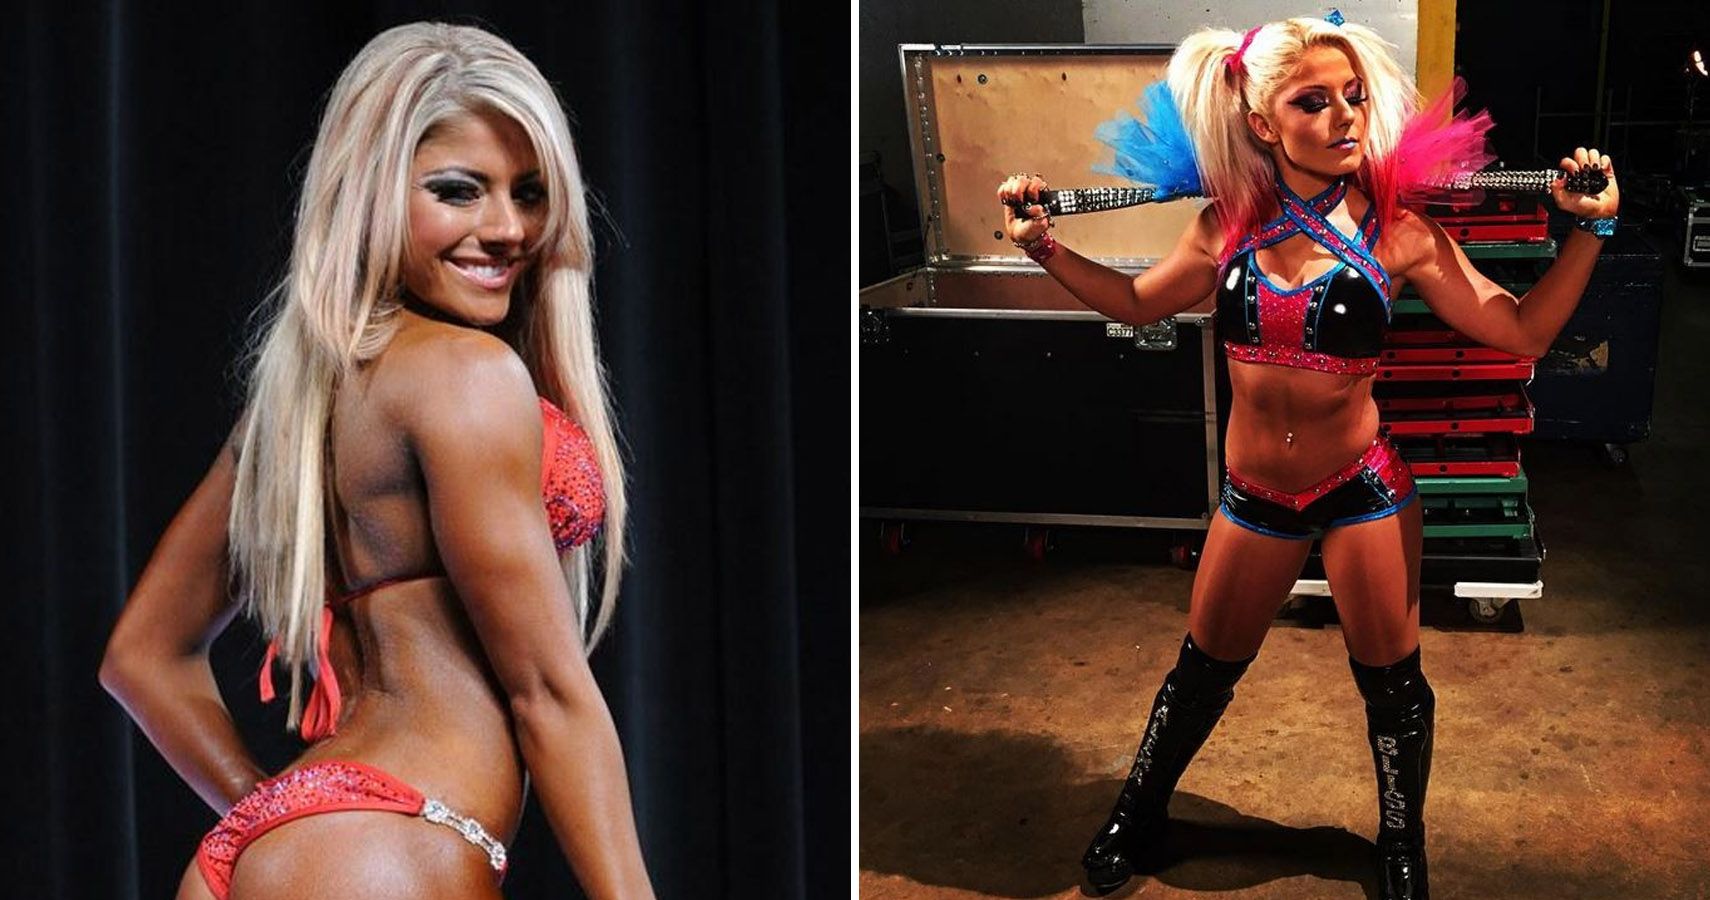 15 Pictures That Prove Alexa Bliss Is Hot AF.